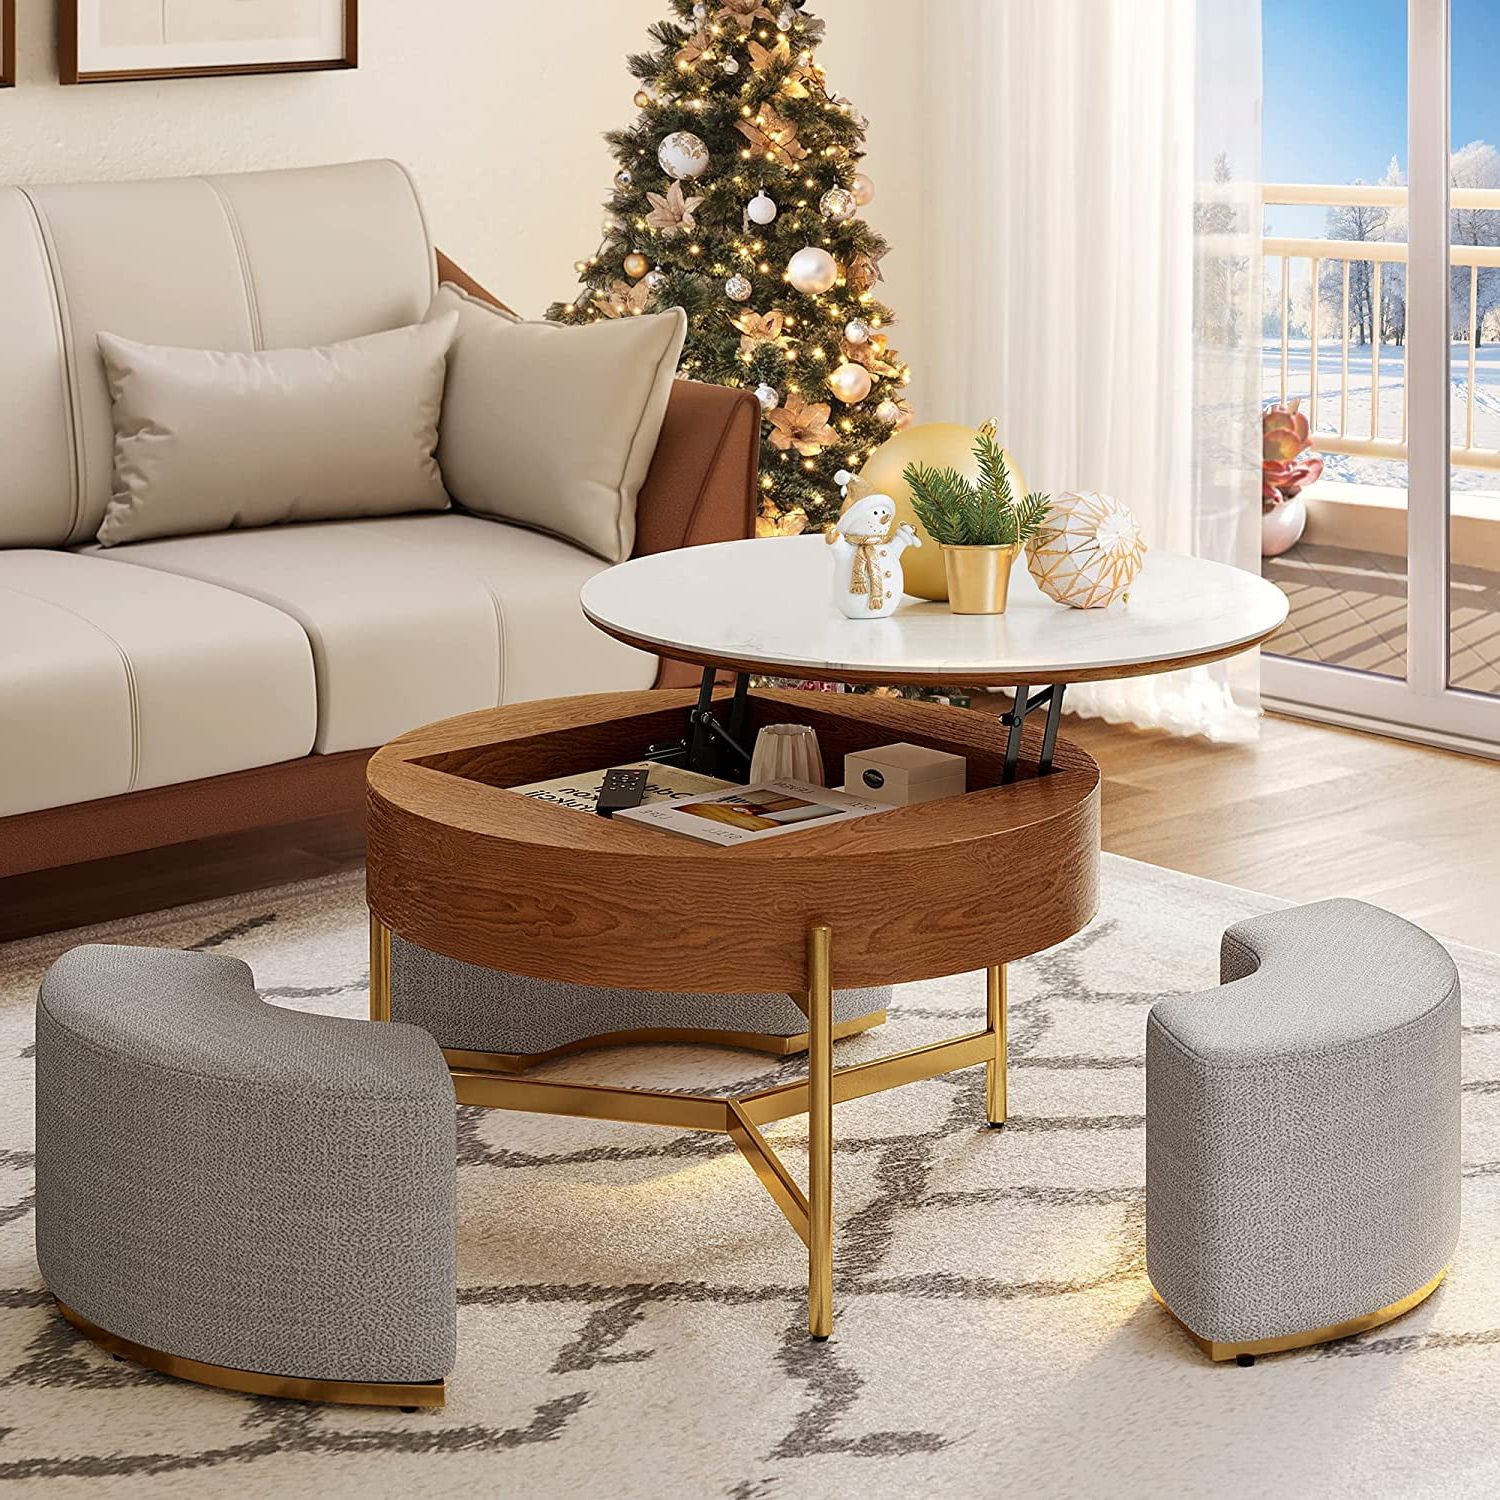 Well Known Lift Top Coffee Tables With Storage For Lift Top Round Coffee Table With Storage Compartment 3 Stools Pop Up Stone  Tabletop Rising Top Modern Coffee Table Set For Living Room Apartment –  Walmart (View 6 of 10)